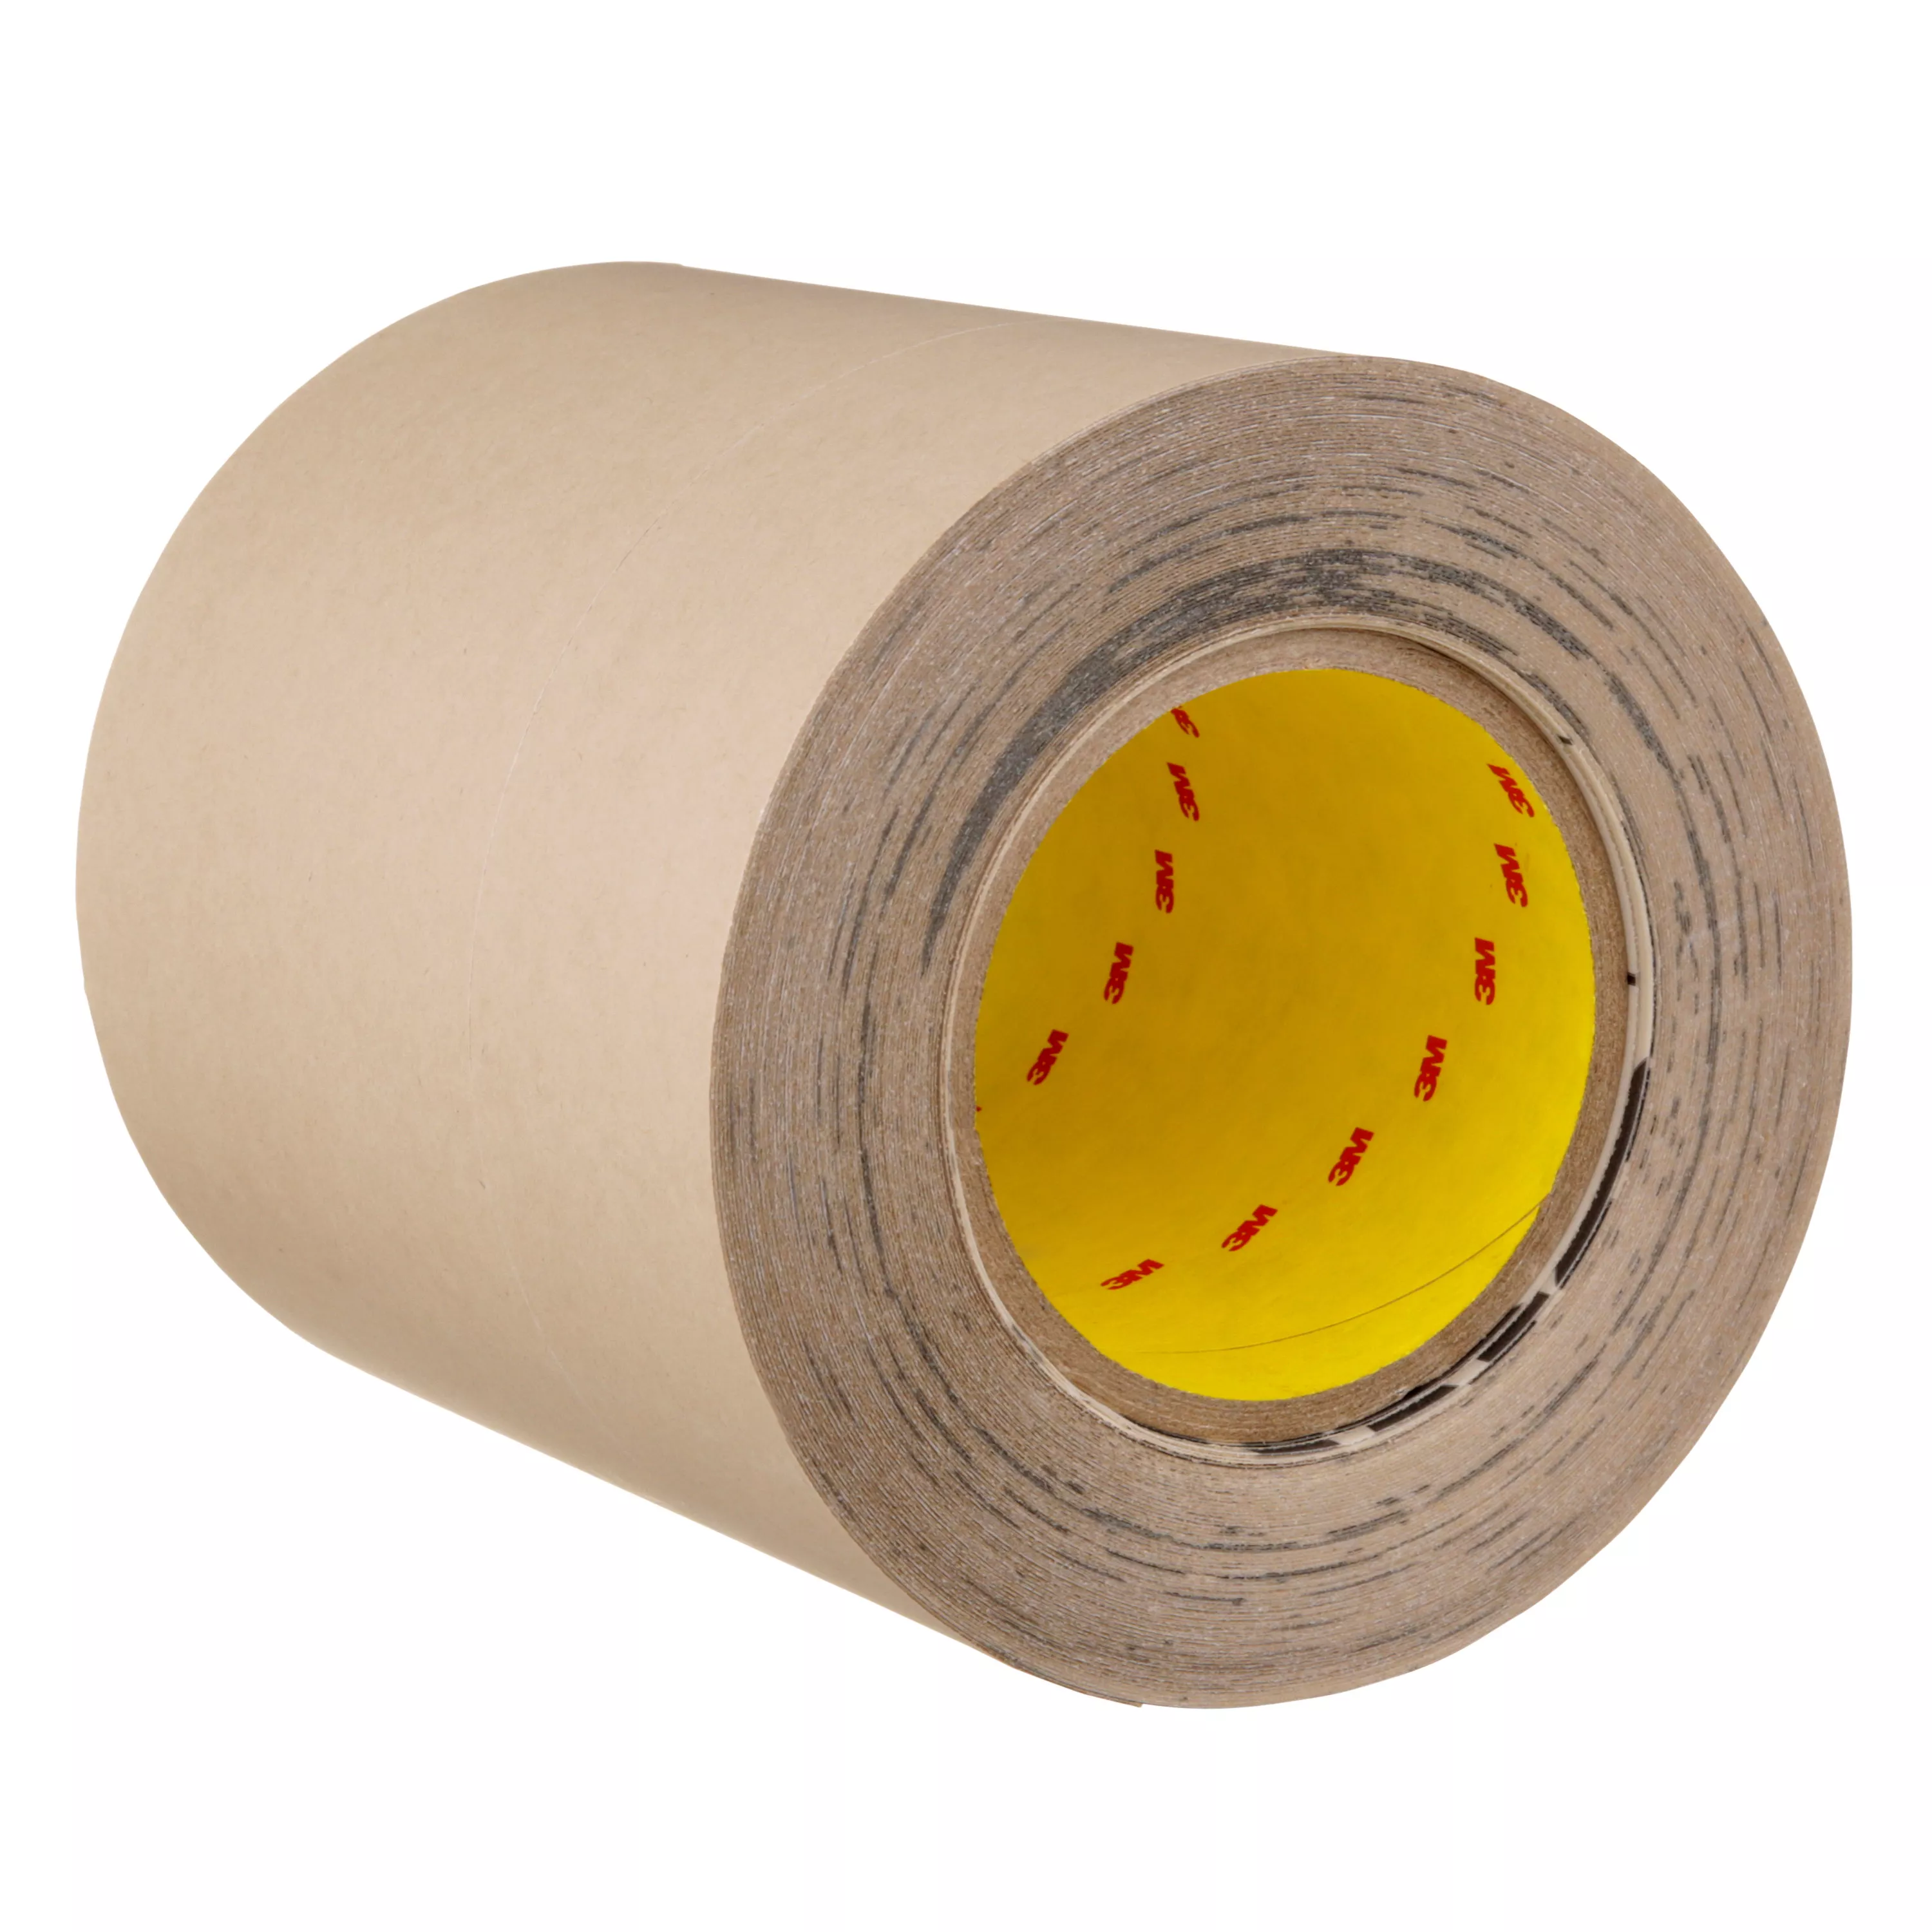 3M™ All Weather Flashing Tape 8067 Tan, 6 in x 75 ft, 8 Roll/Case, Slit
Liner (2-4 Slit)